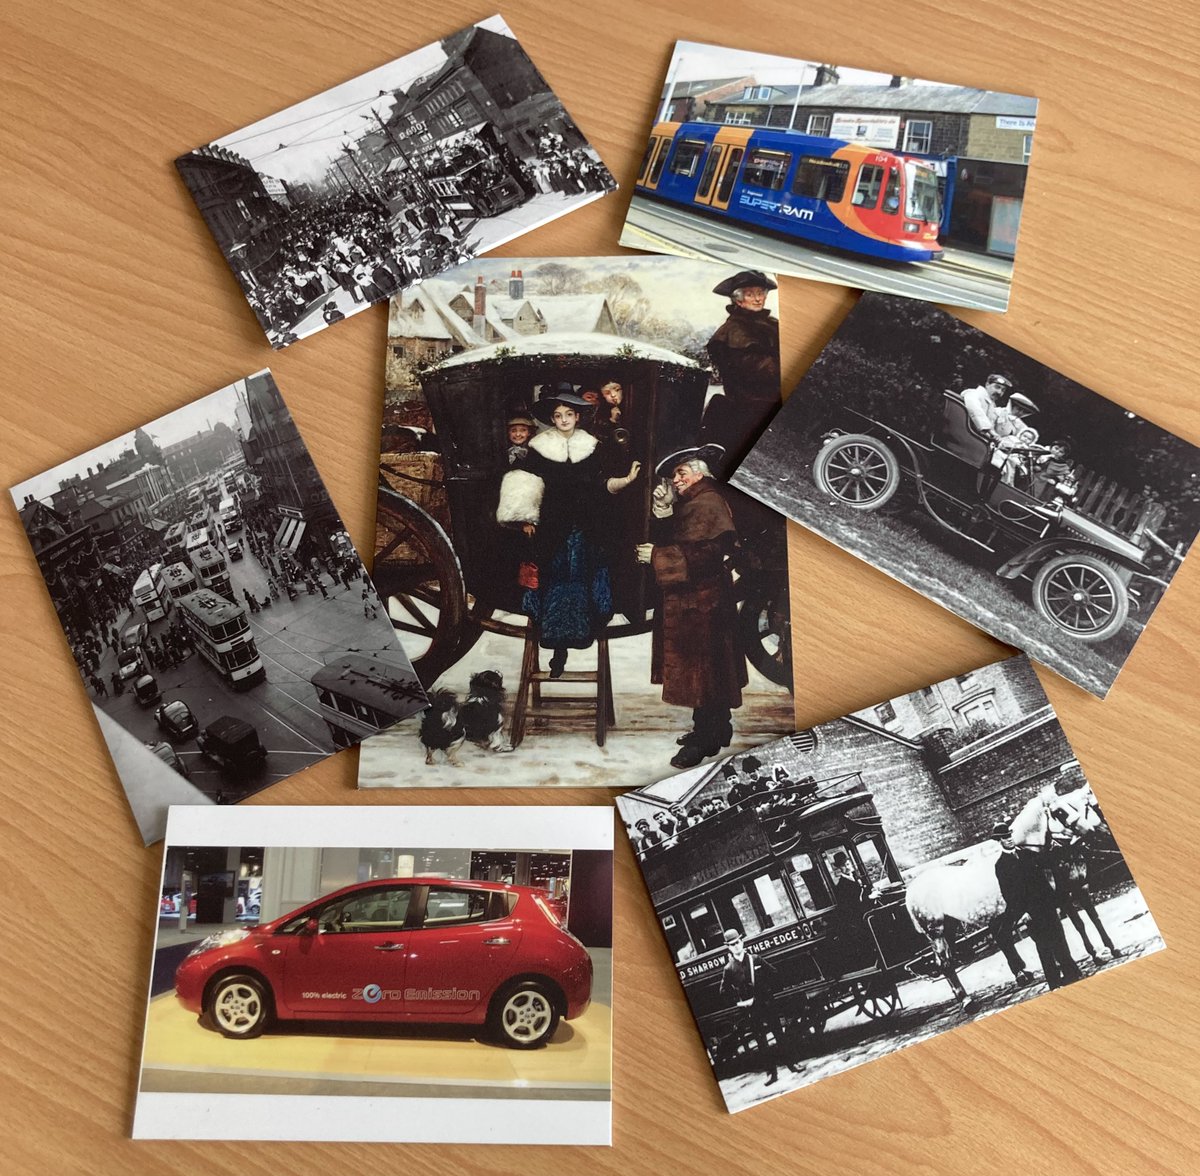 Selecting the photos for memory cafe - this month's theme is transport 🚗 🚂🚋 Memory Cafe at Weston Park Museum is our monthly free, friendly drop-in session for people living with Dementia or memory issues, their carers and friends. 🔗Find out more: sheffieldmuseums.org.uk/whats-on/memor…